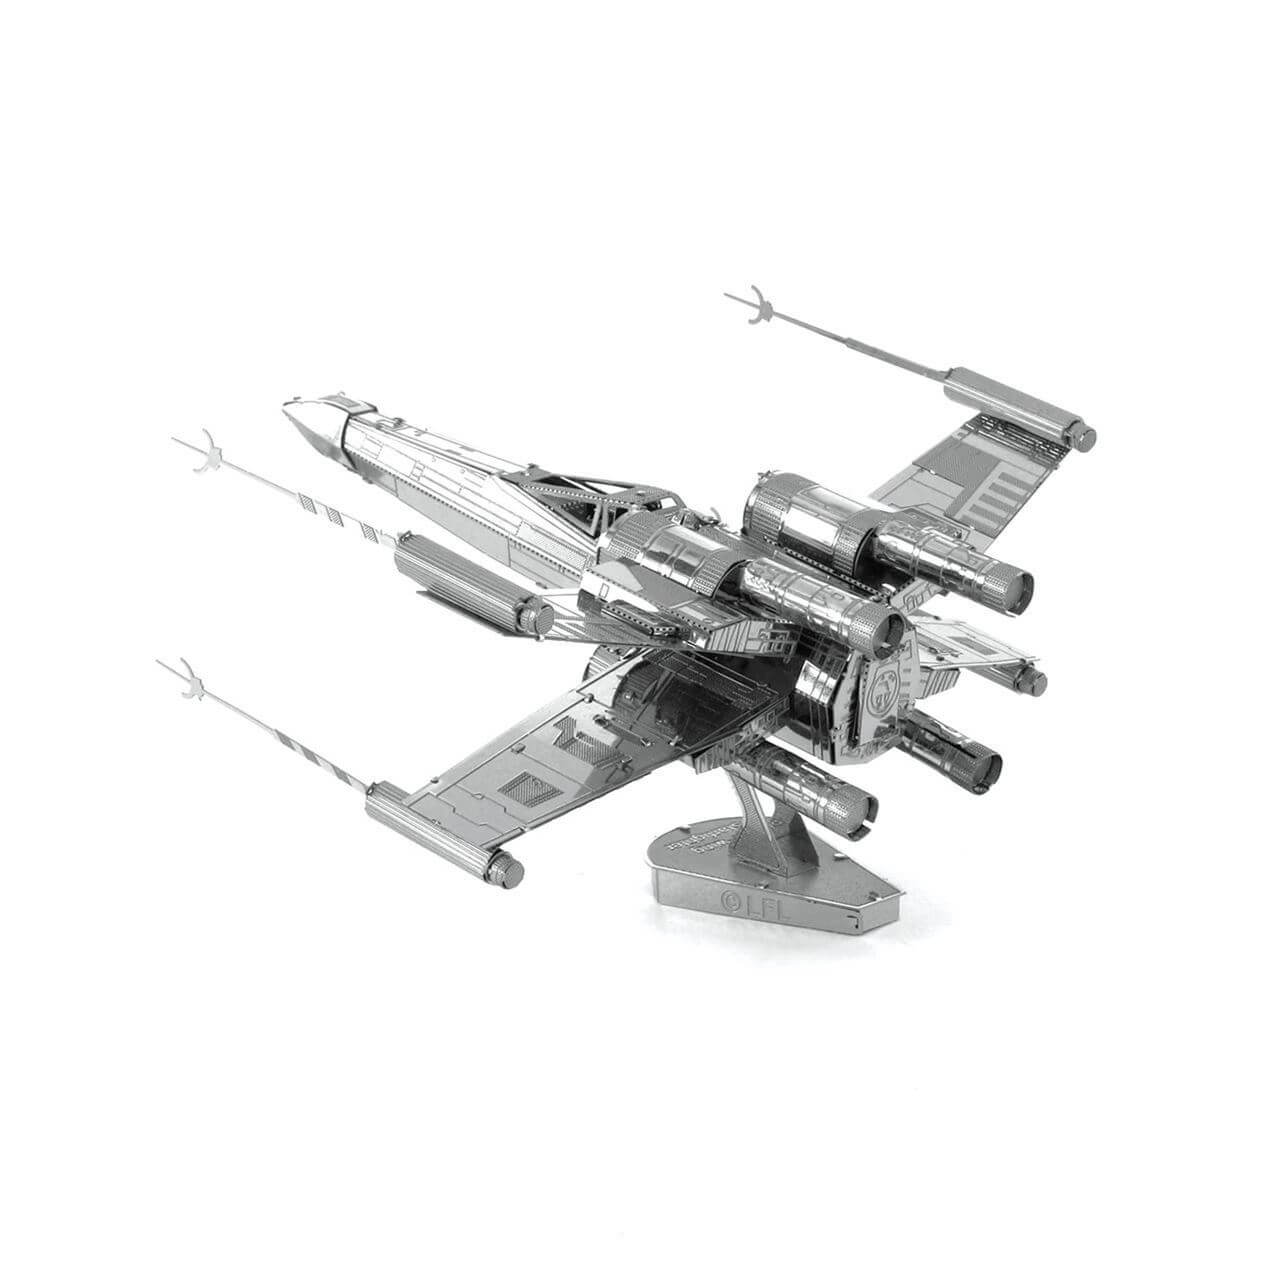 Side view of the Metal Earth Star Wars X-Wing Starfighter Metal Model Kit - 2 Sheets.